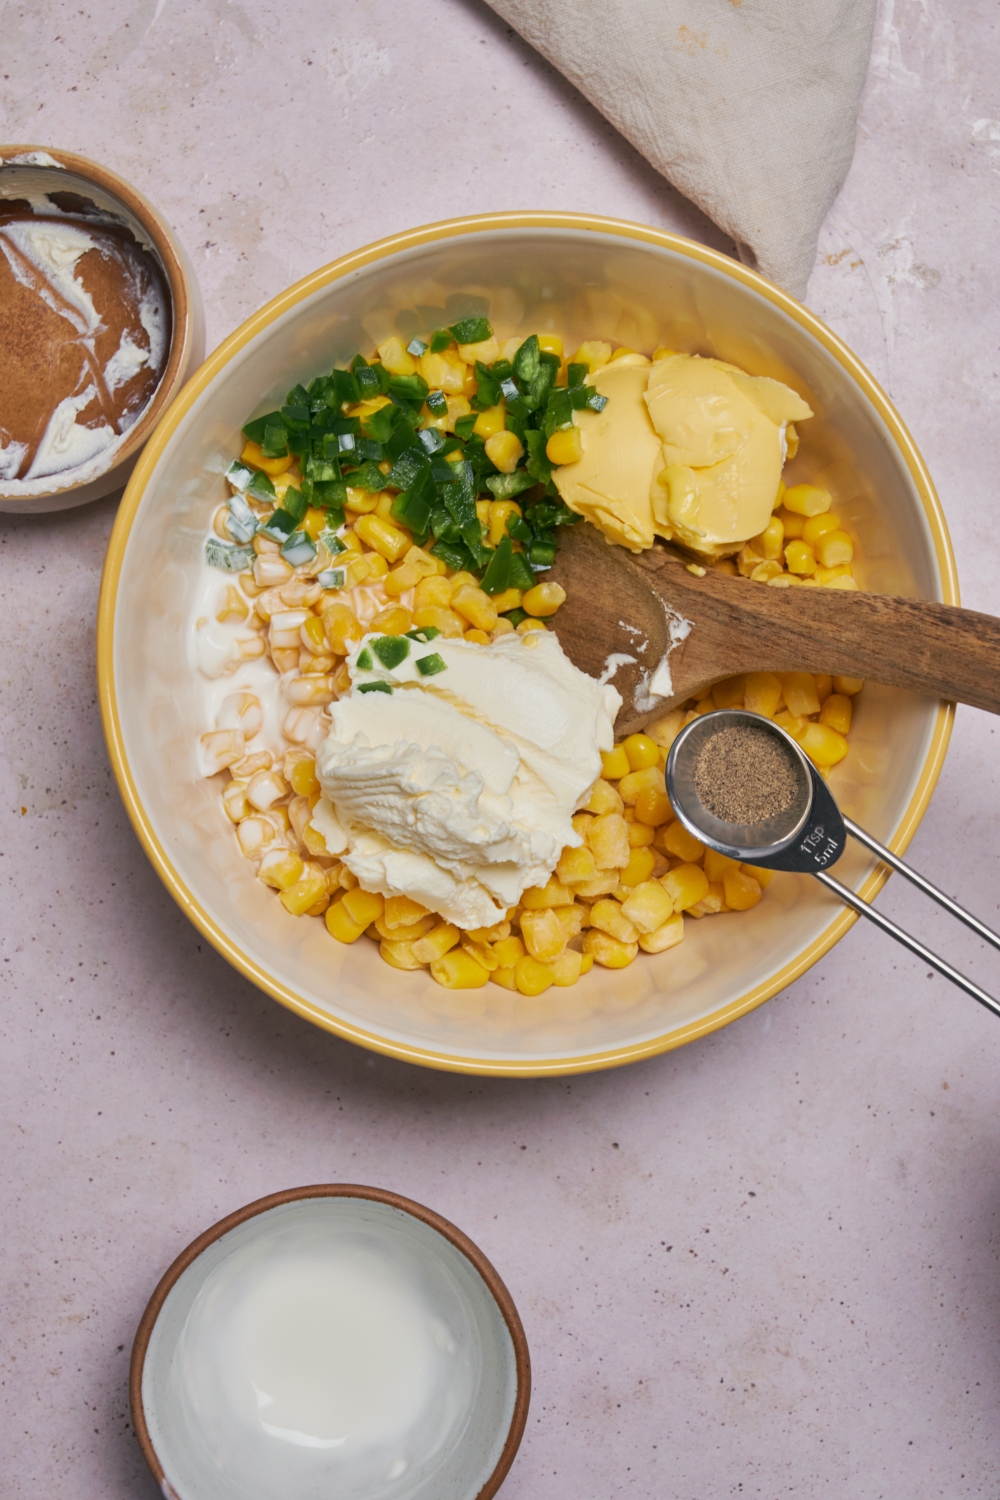 Ingredients for jalapeno corn casserole in a white mixing bowl